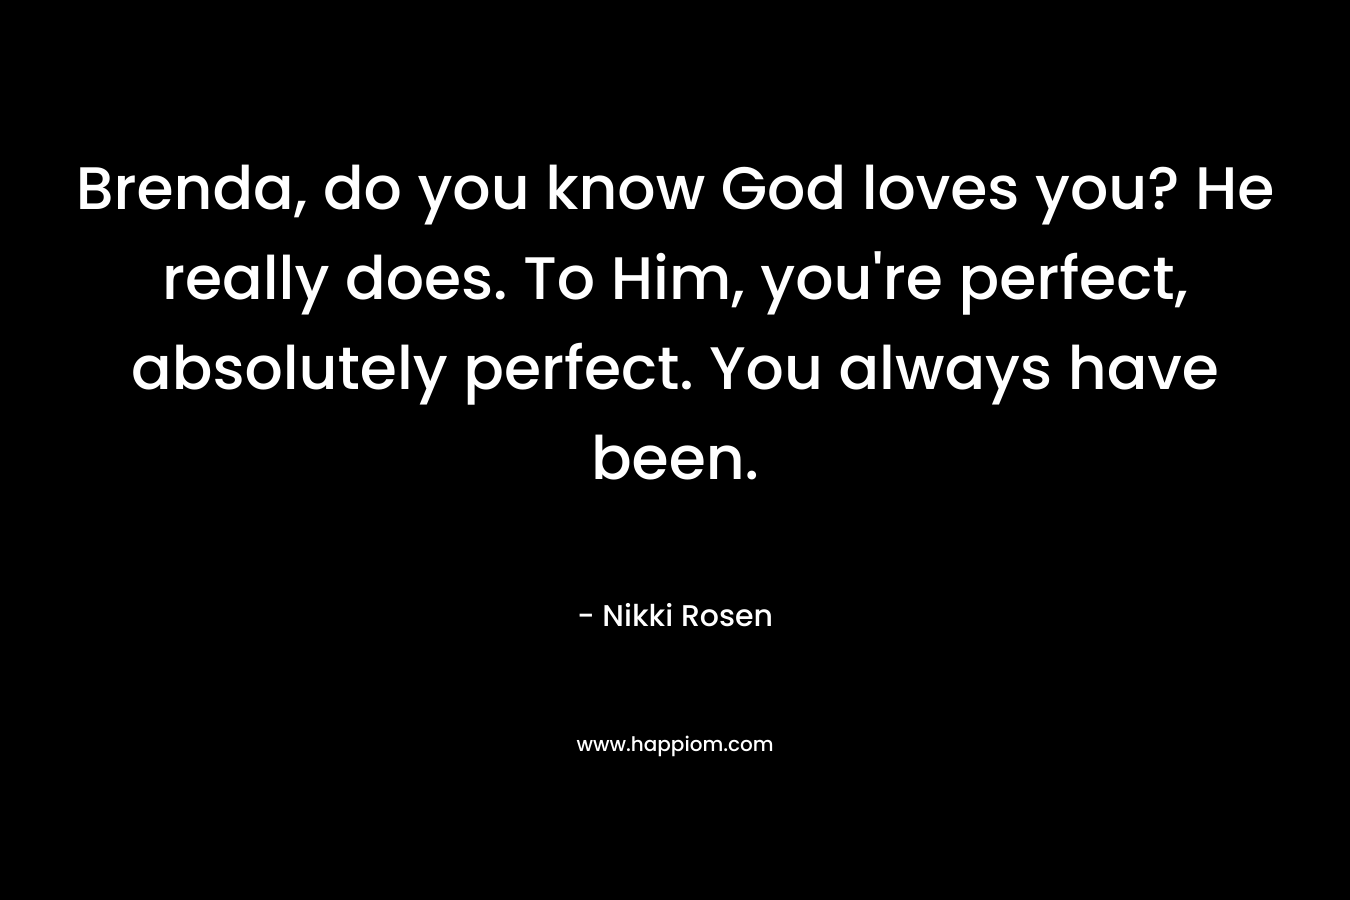 Brenda, do you know God loves you? He really does. To Him, you’re perfect, absolutely perfect. You always have been. – Nikki Rosen